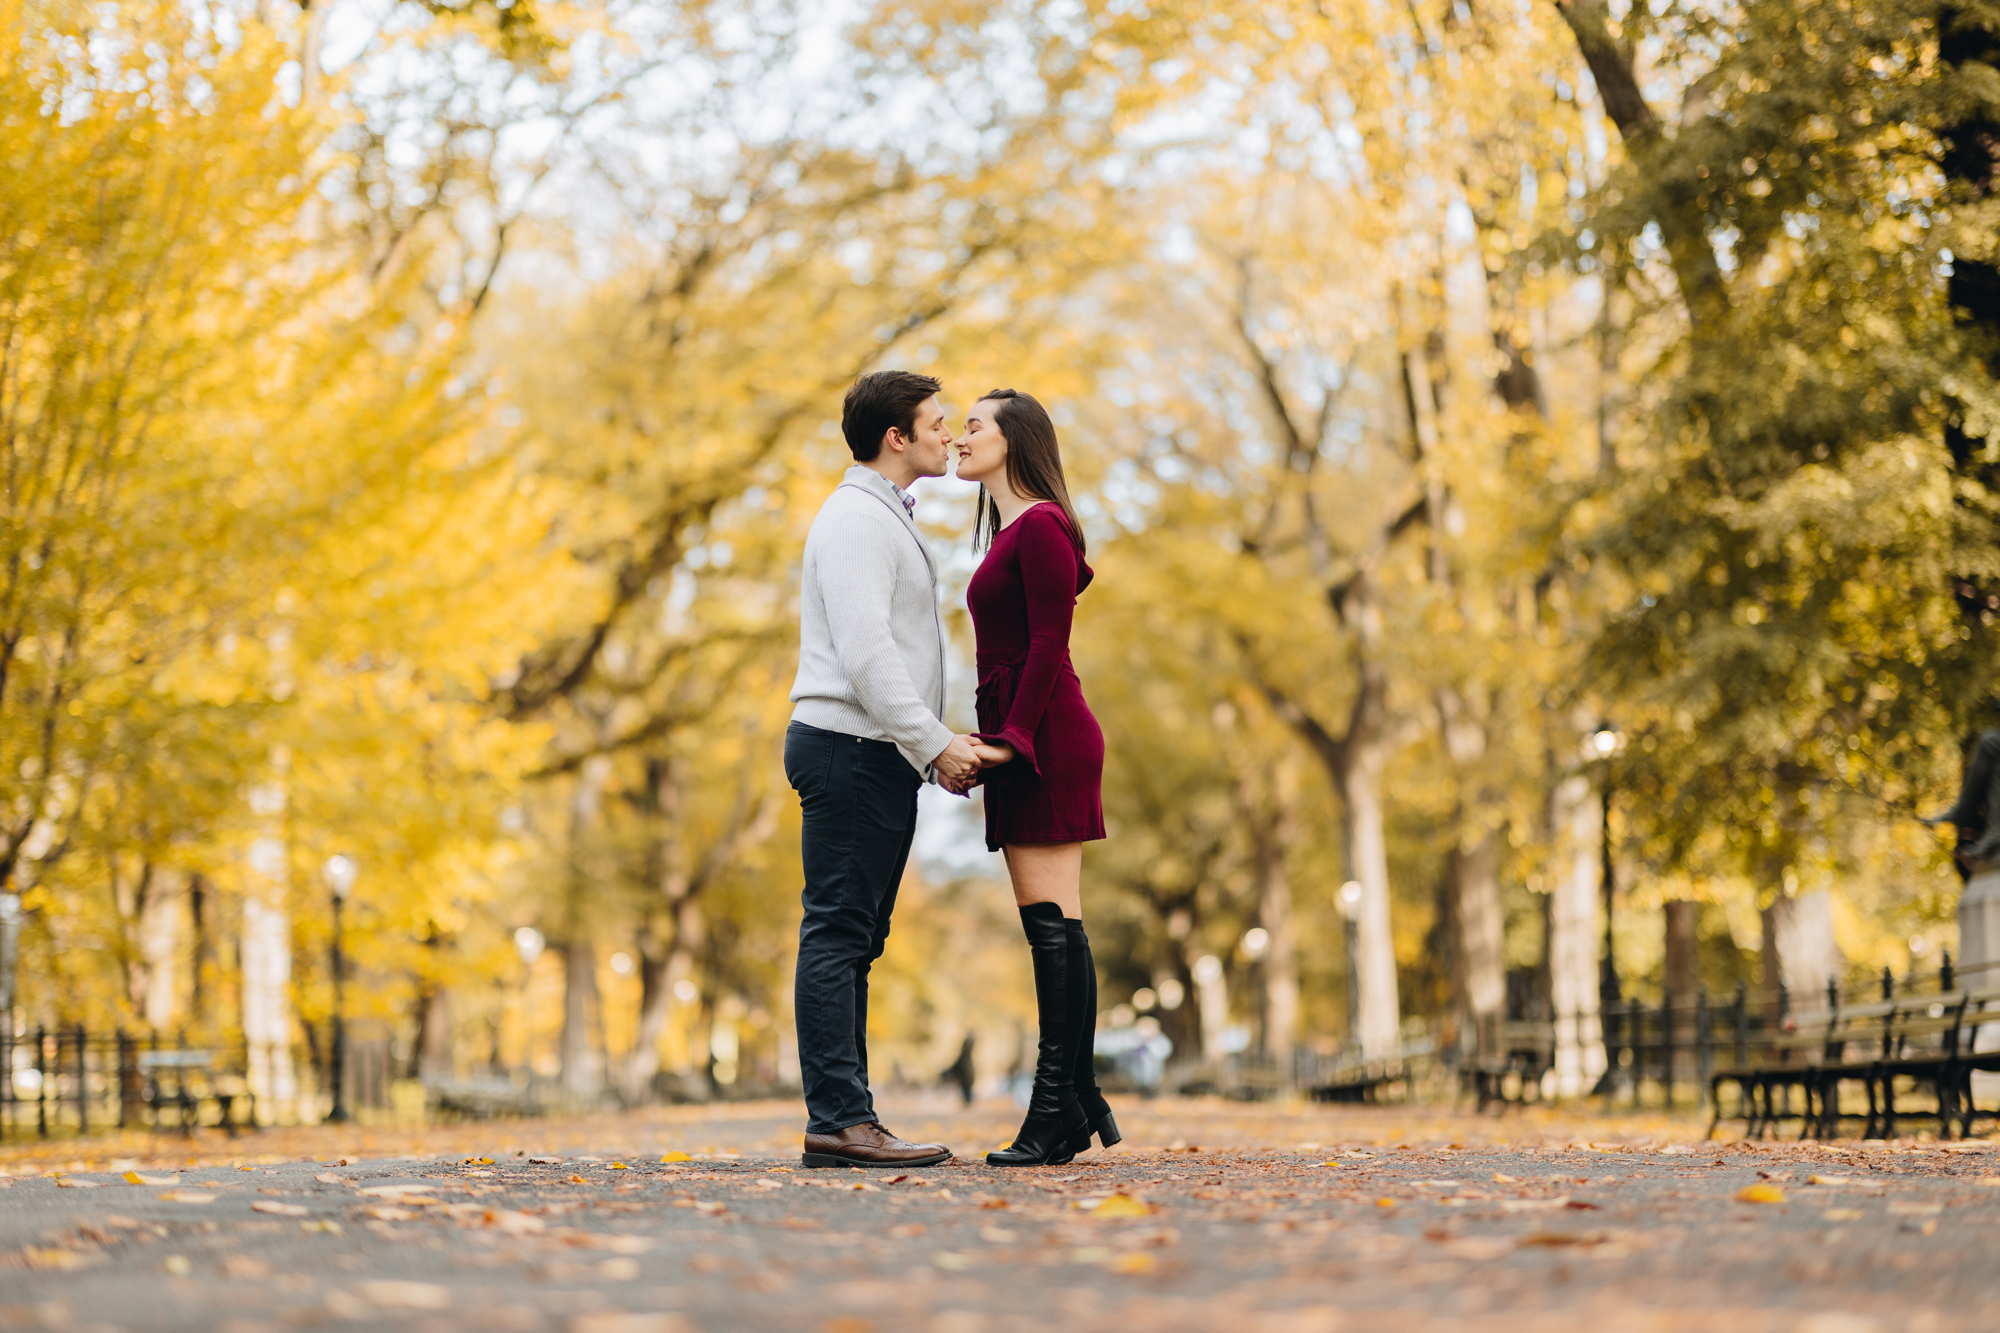 Dazzling Fall Engagement Photos in Central Park New York